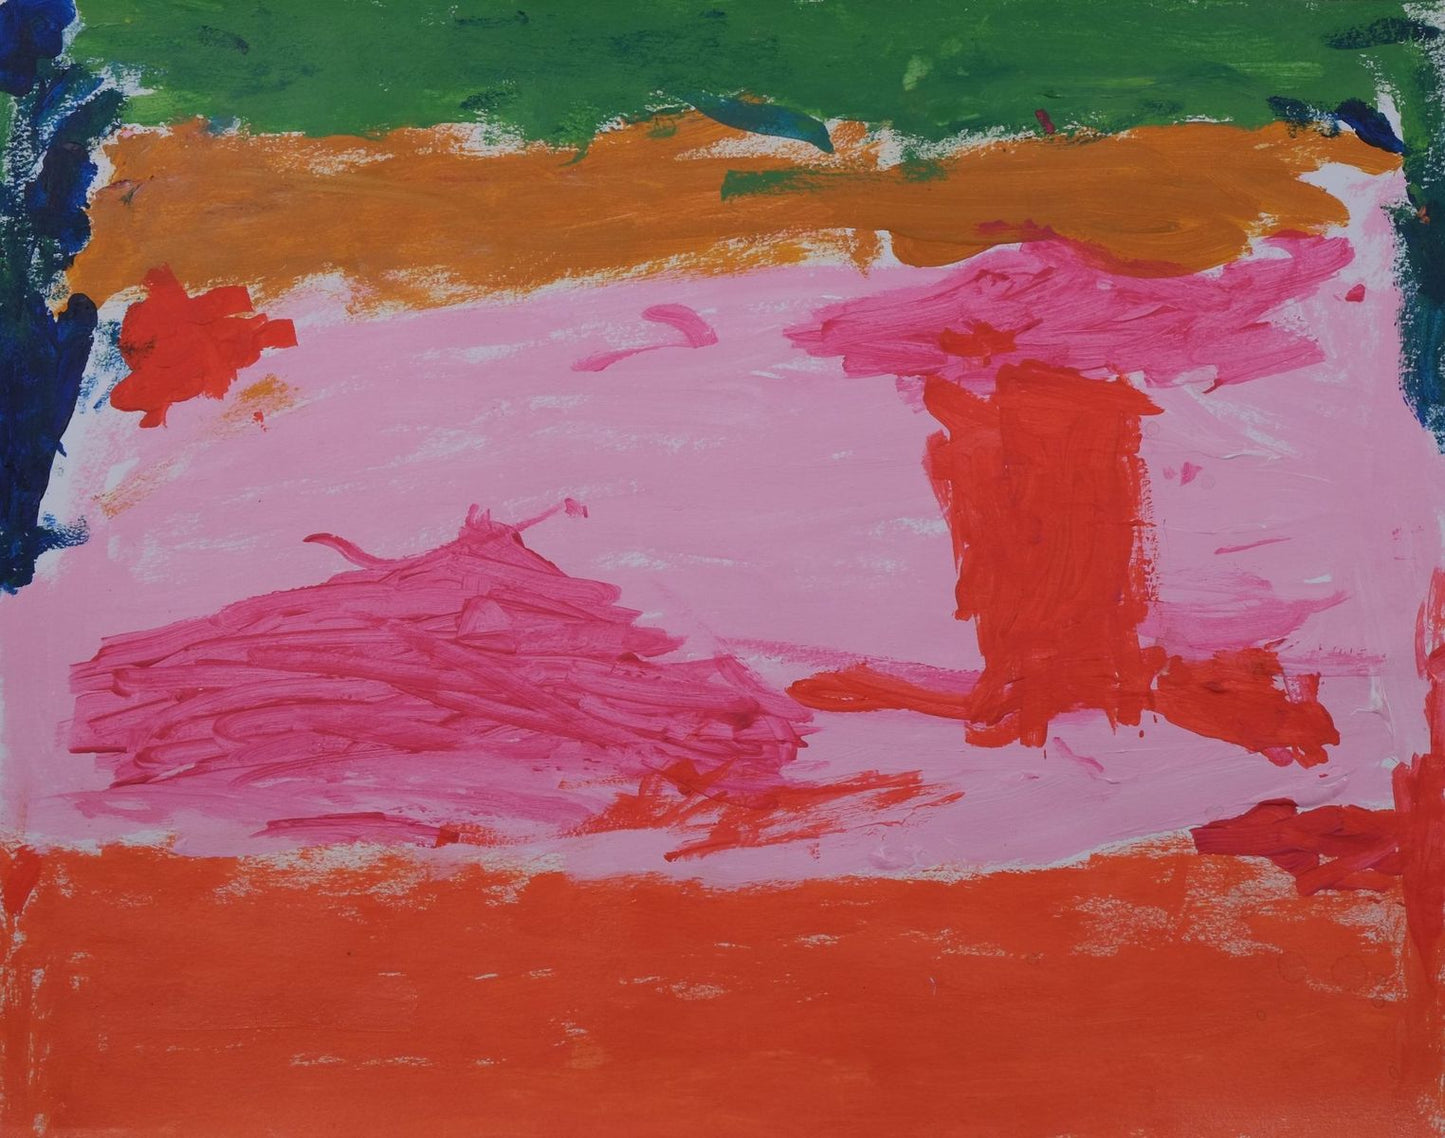 Acrylic on paper artwork with a vertical green, orange, light pink and burnt orange line with two darker pink ovals and a red rectangle in the middle